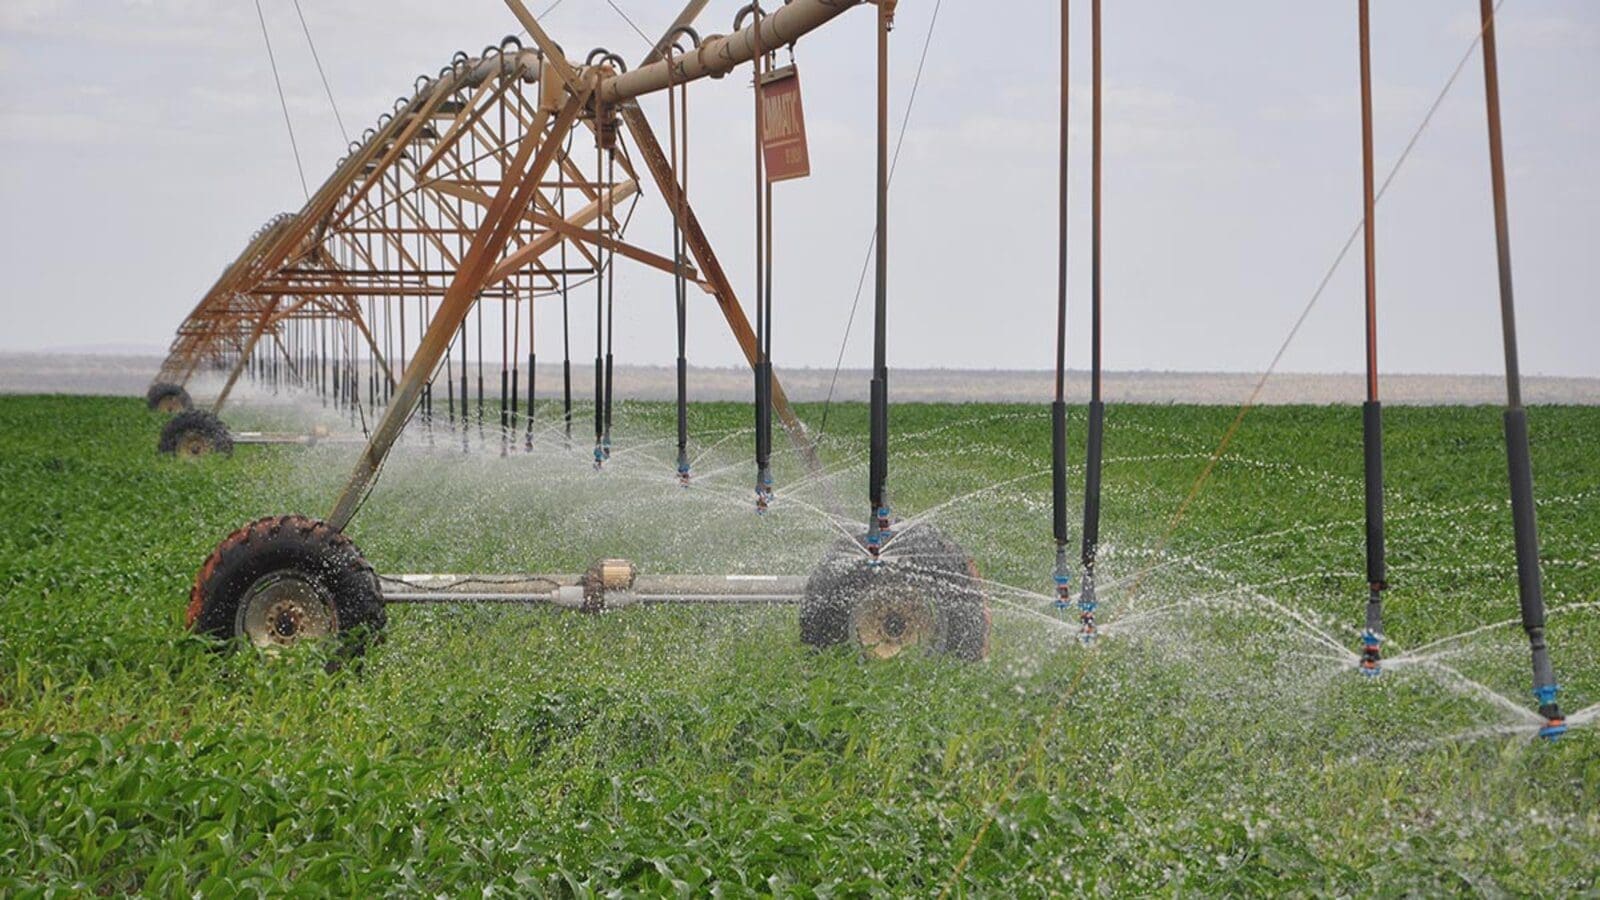 Kenya sets aside US$8M for the electrification of the Galana-Kulalu Irrigation Scheme to attract private investors